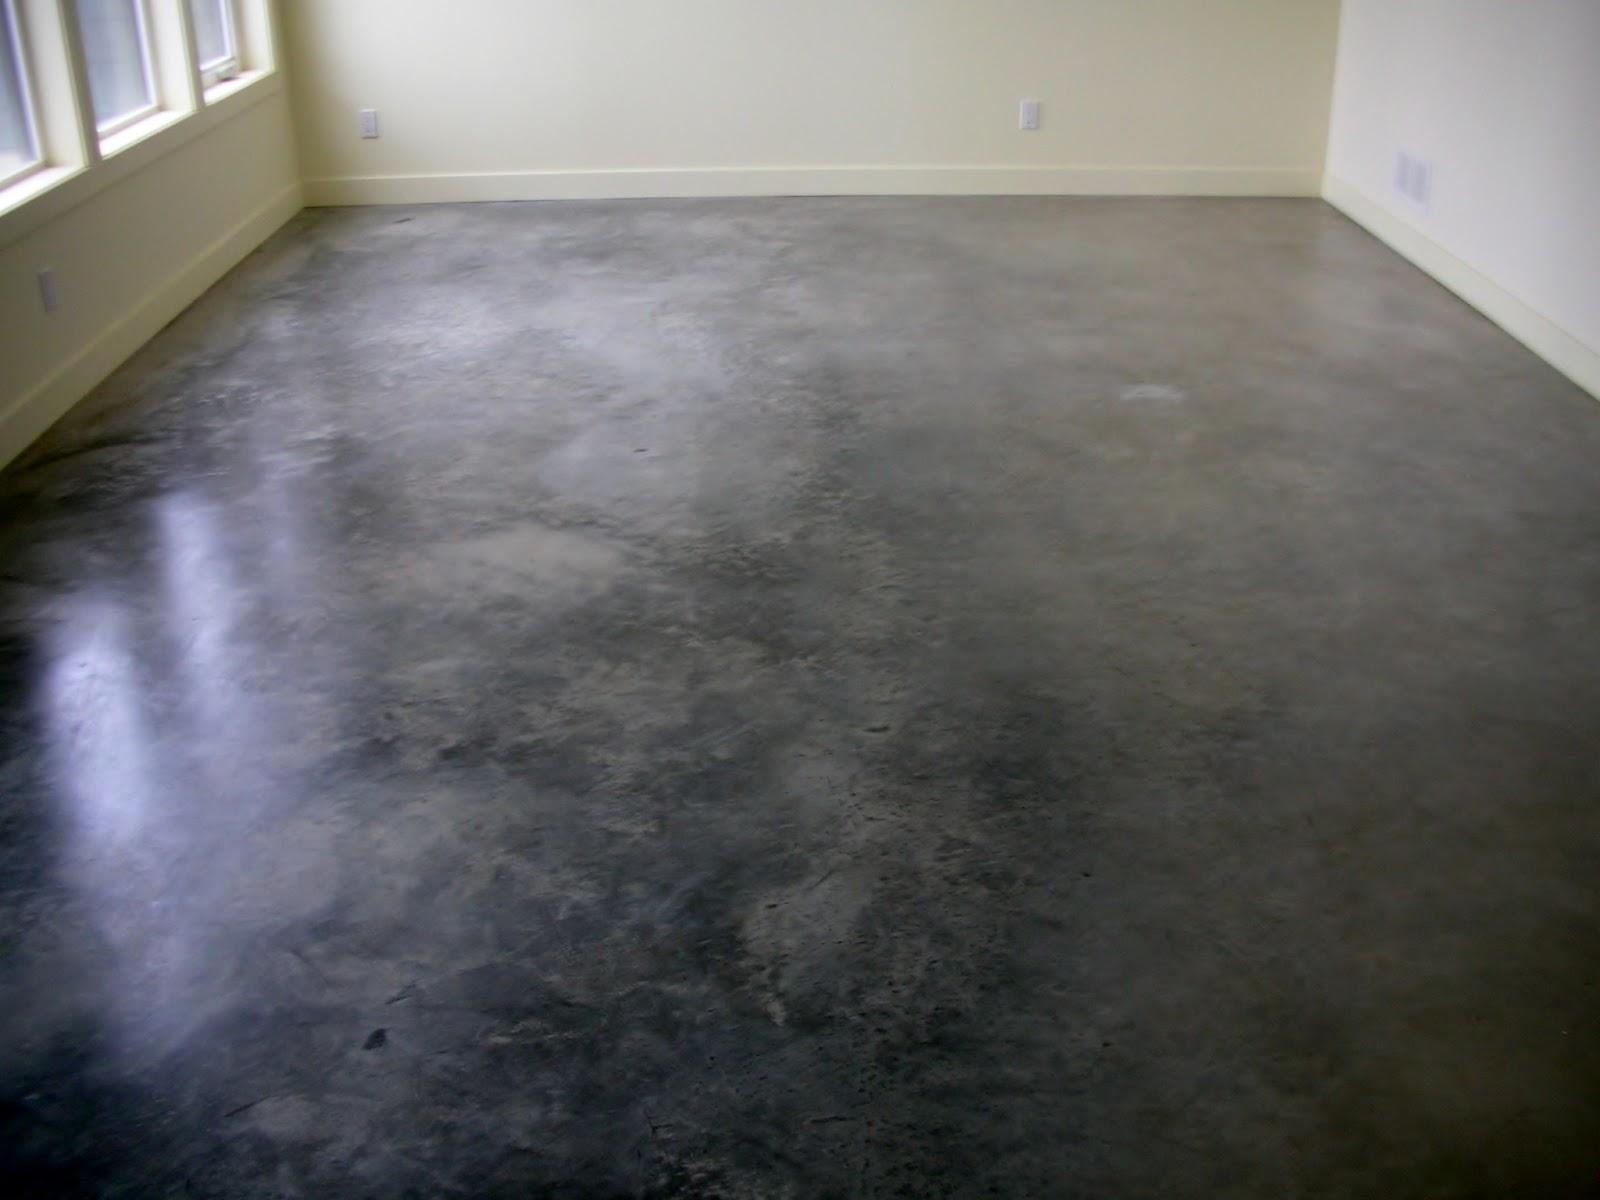 MODE CONCRETE: Concrete Floors Naturally Look Amazing and Modern